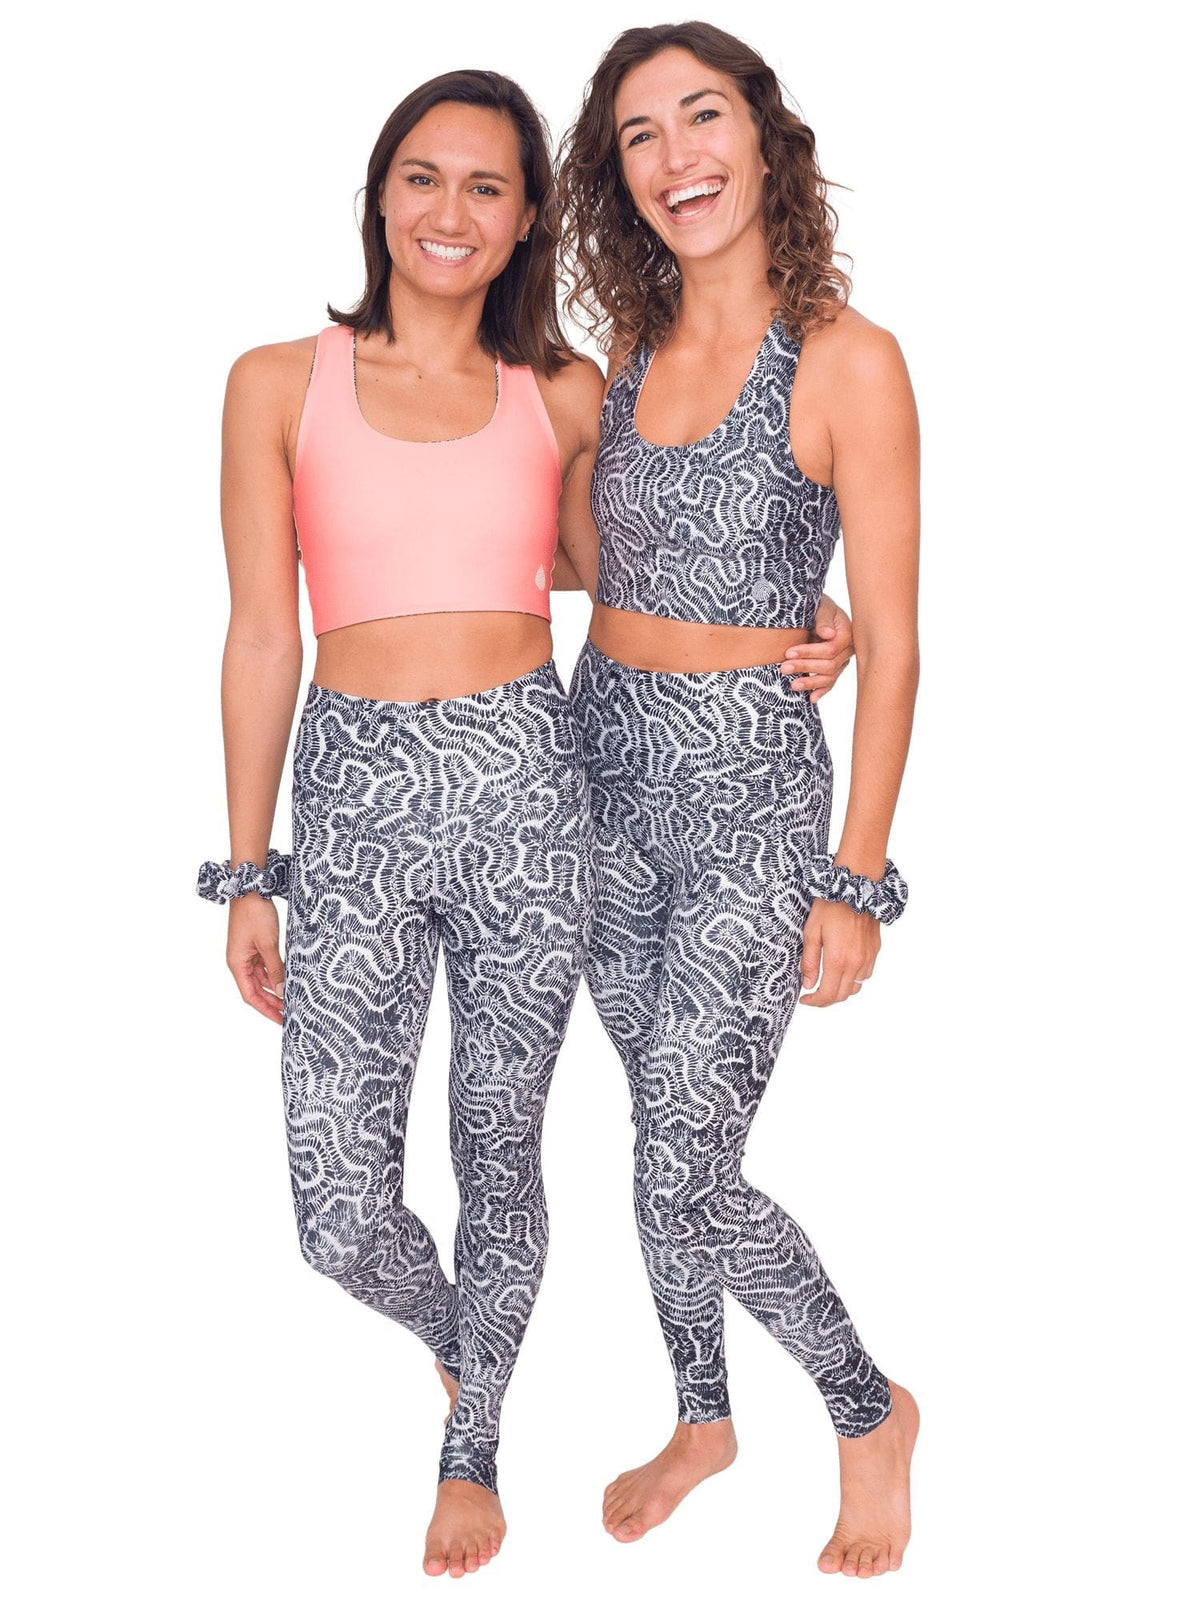 Model: Remedy (left) is 5&#39;7&quot;, 130lbs, and is wearing a size S Reversible Top and XS Legging. Liv (right) is 5&#39;8&quot;, 130lbs and is wearing a size M Reversible Top and size S Legging.